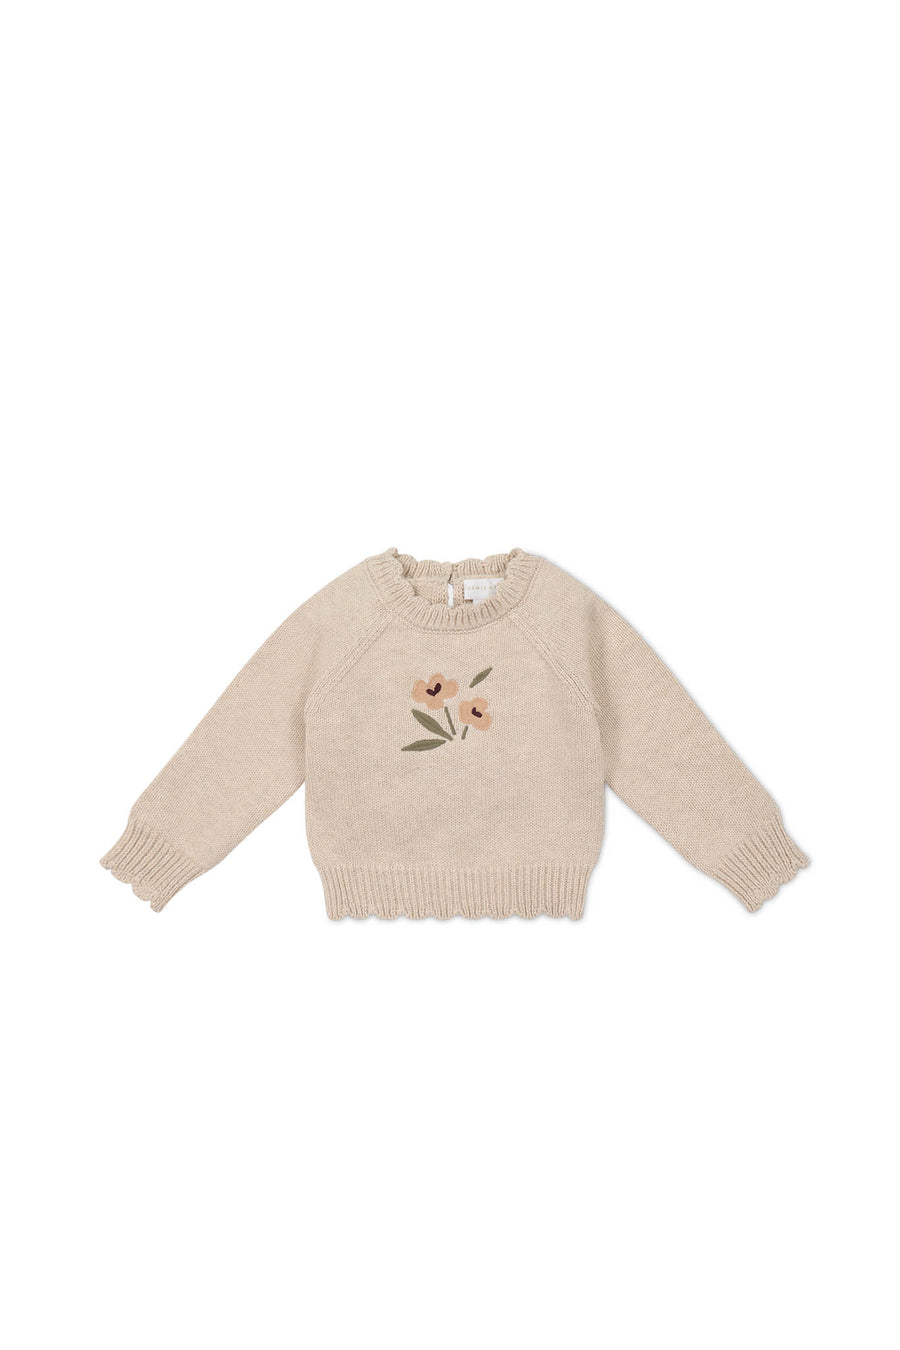 Audrey Knitted Jumper - Oatmeal Marle Petite Goldie Childrens Jumper from Jamie Kay NZ